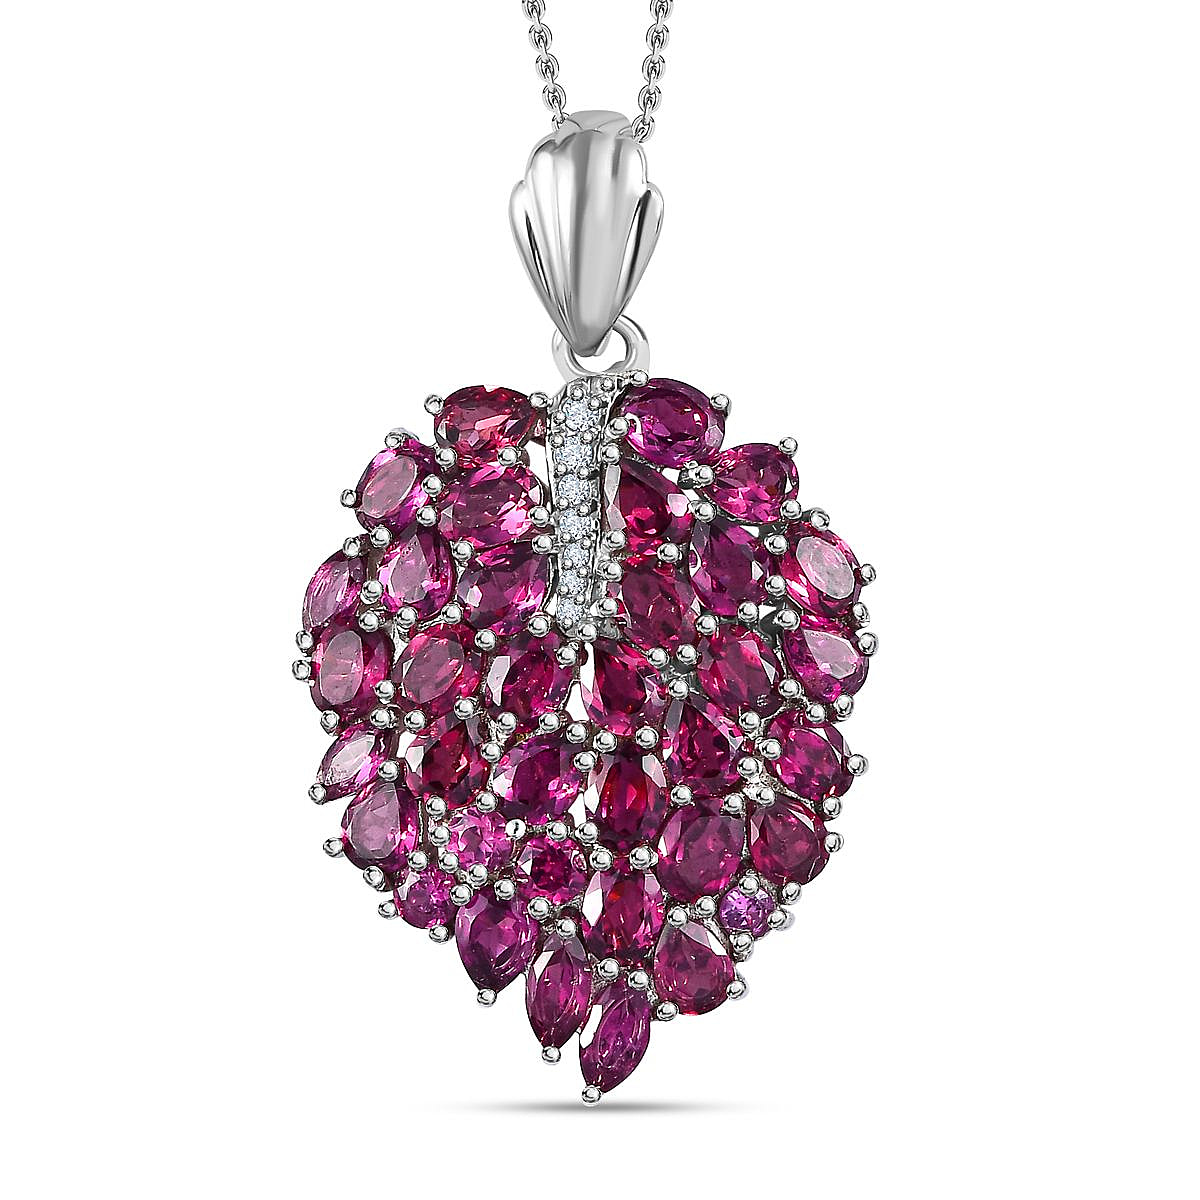 Rhodolite Garnet & Natural Zircon Pendant with Chain (Size 20) in Platinum Overlay Sterling Silver 6.78 Ct, Silver Wt. 6.59 Gms